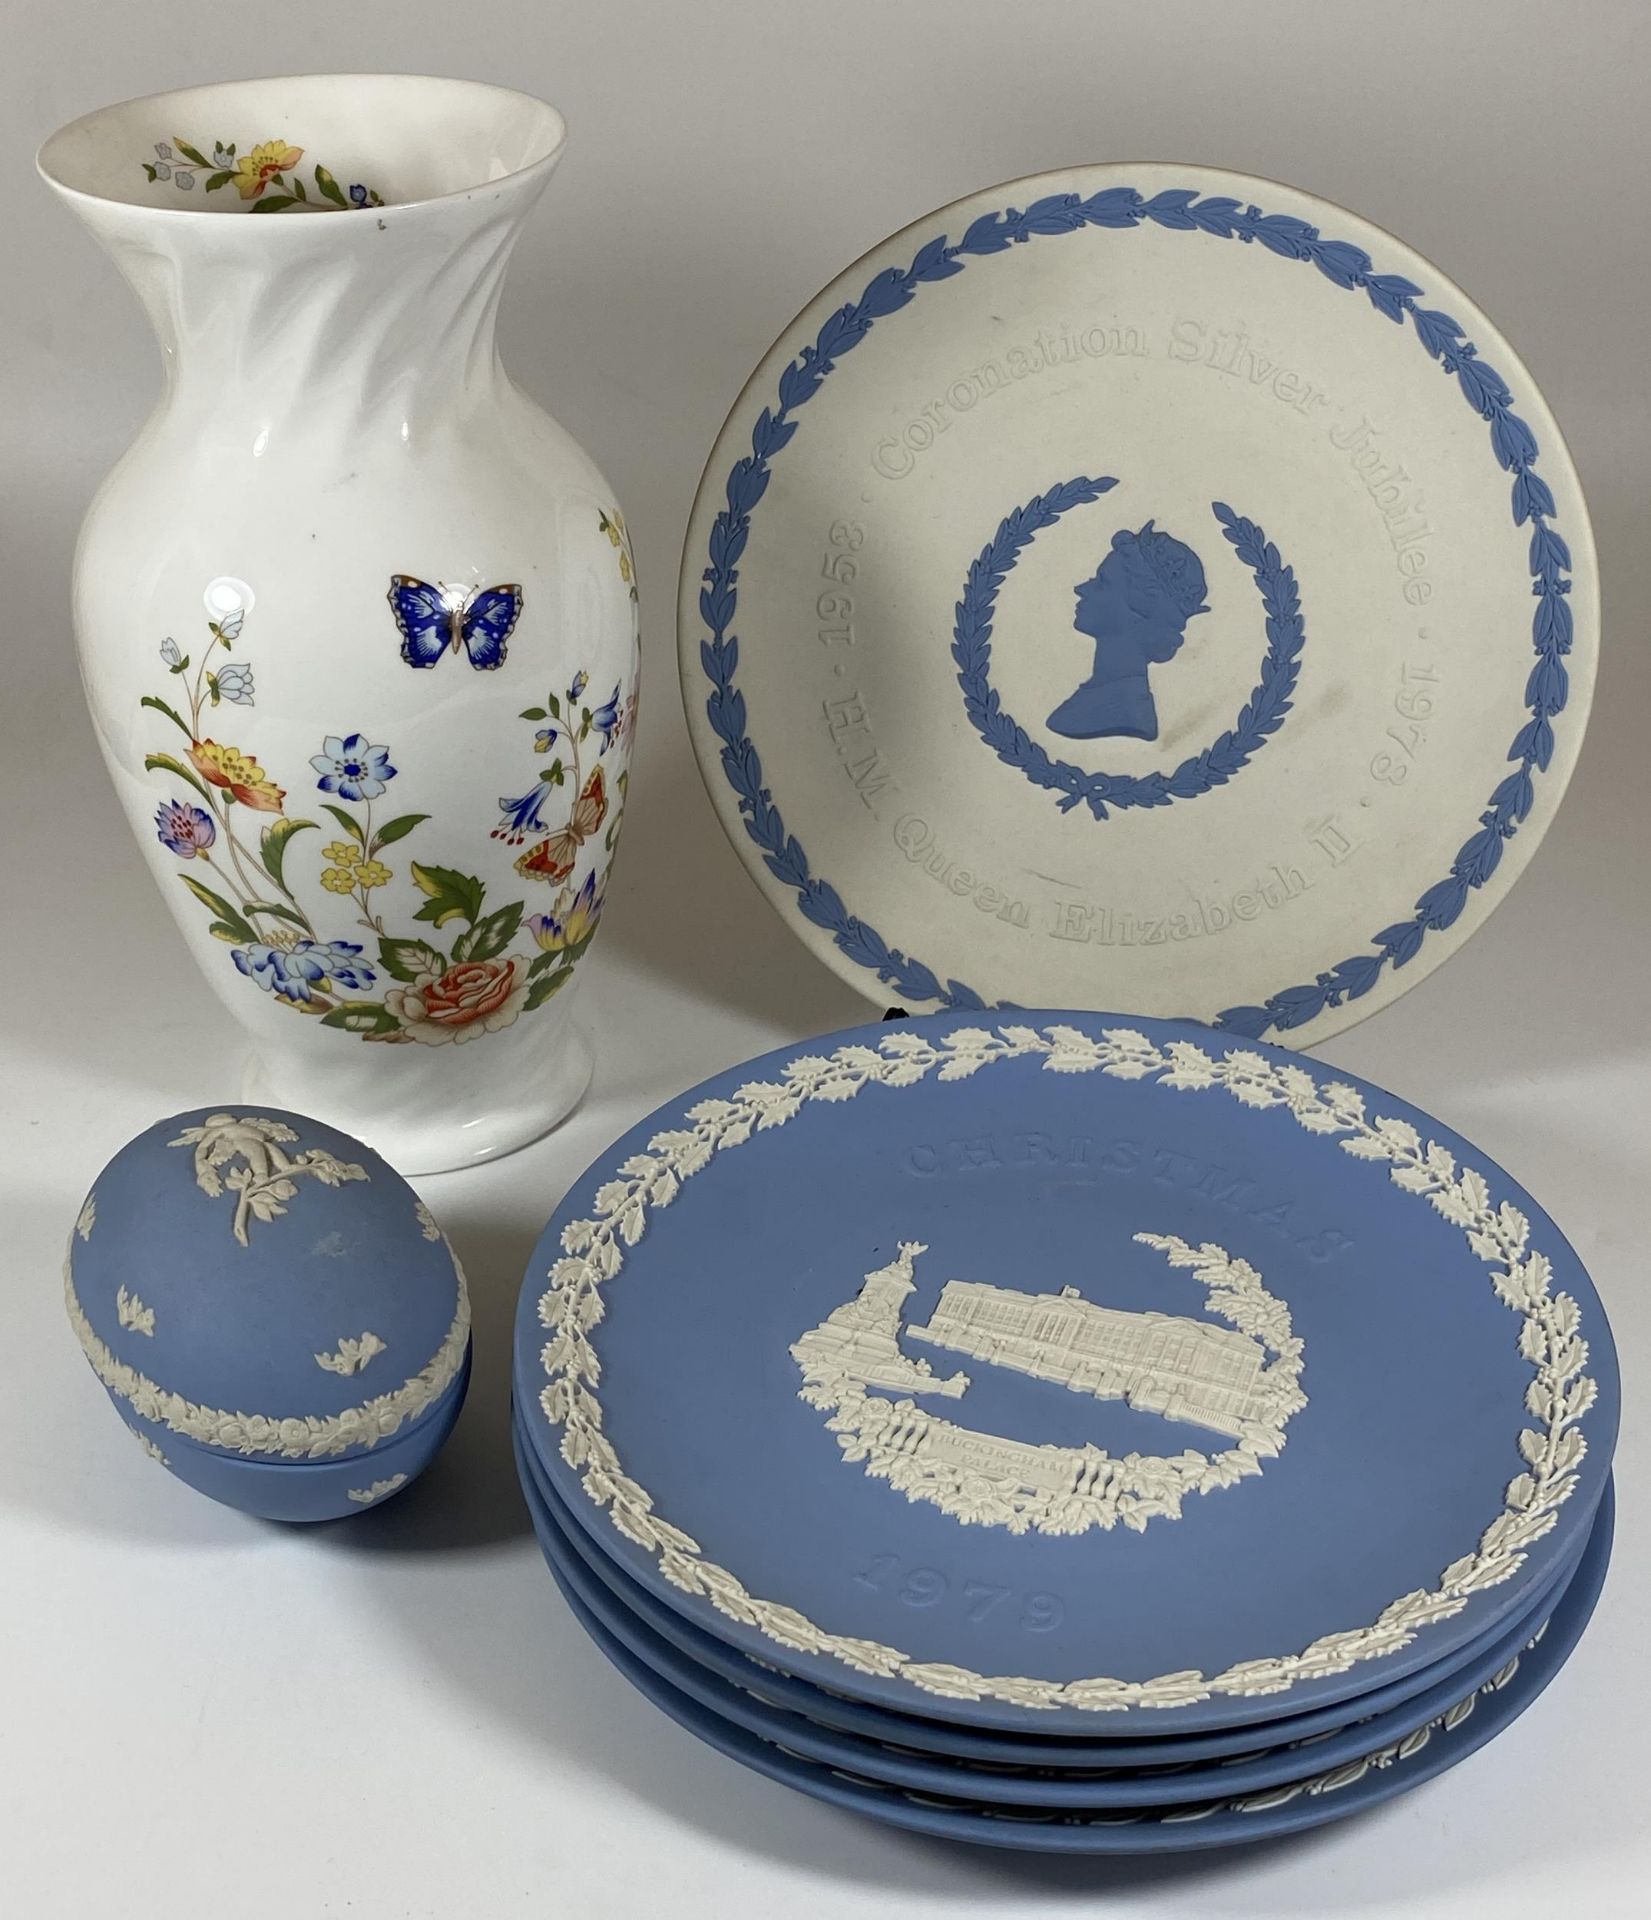 A GROUP OF WEDGWOOD JASPERWARE COMMEMORATIVE PLATES, SILVER JUIBLEE, CHRISTMAS PLATES, EGG BOX AND